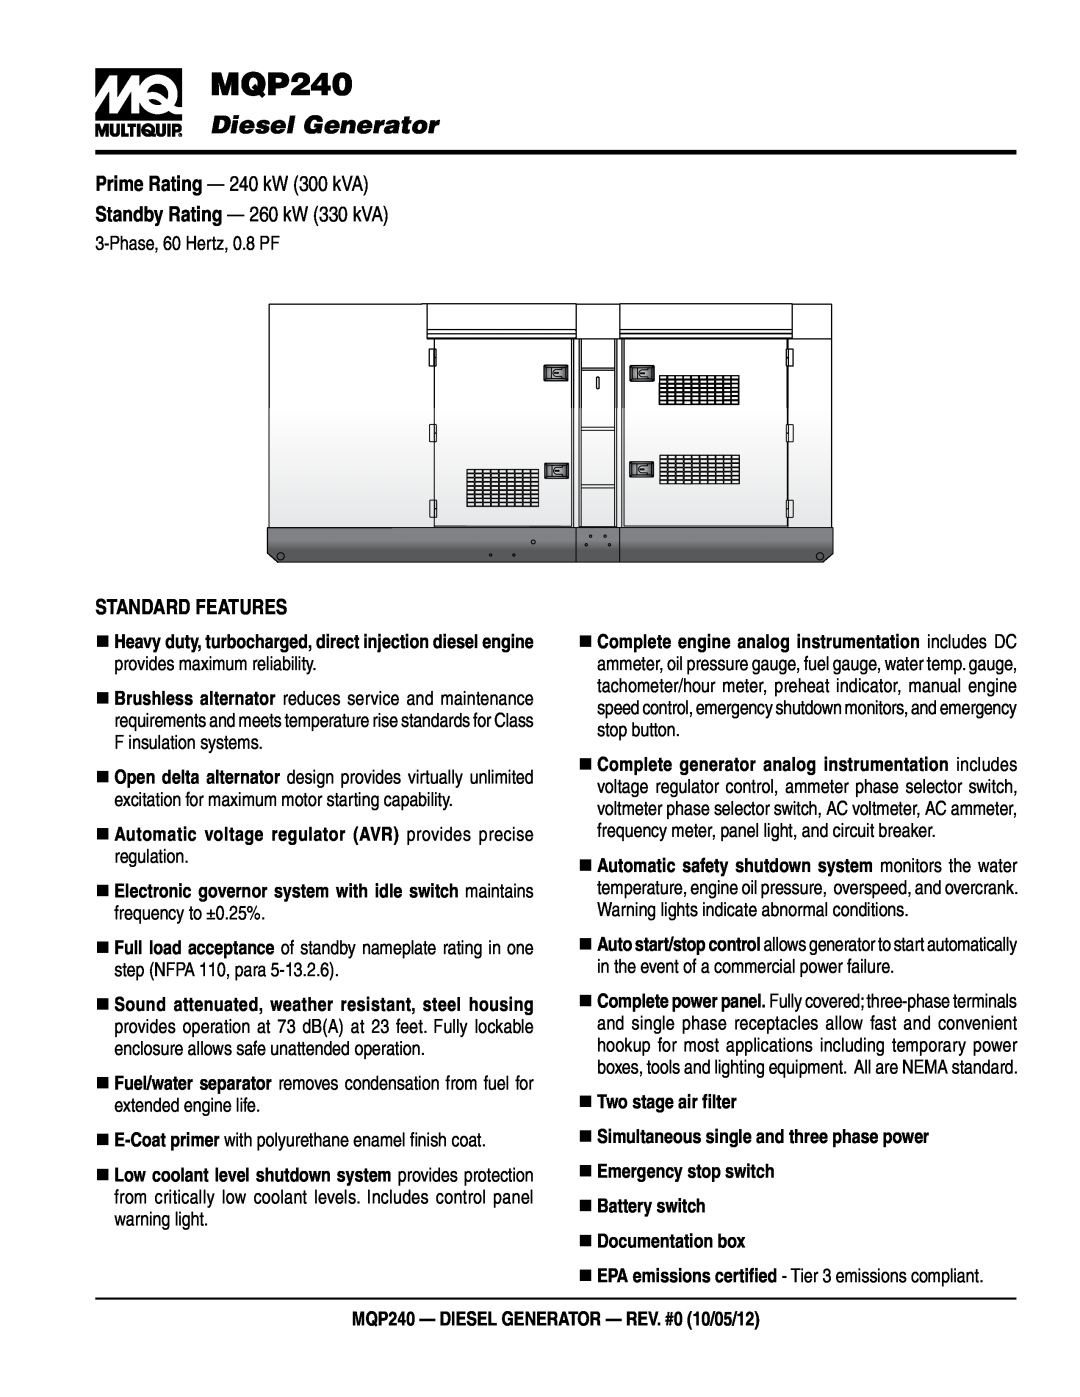 Multiquip manual  MQP240, Diesel Generator, Standard Features, „„Two stage air filter 